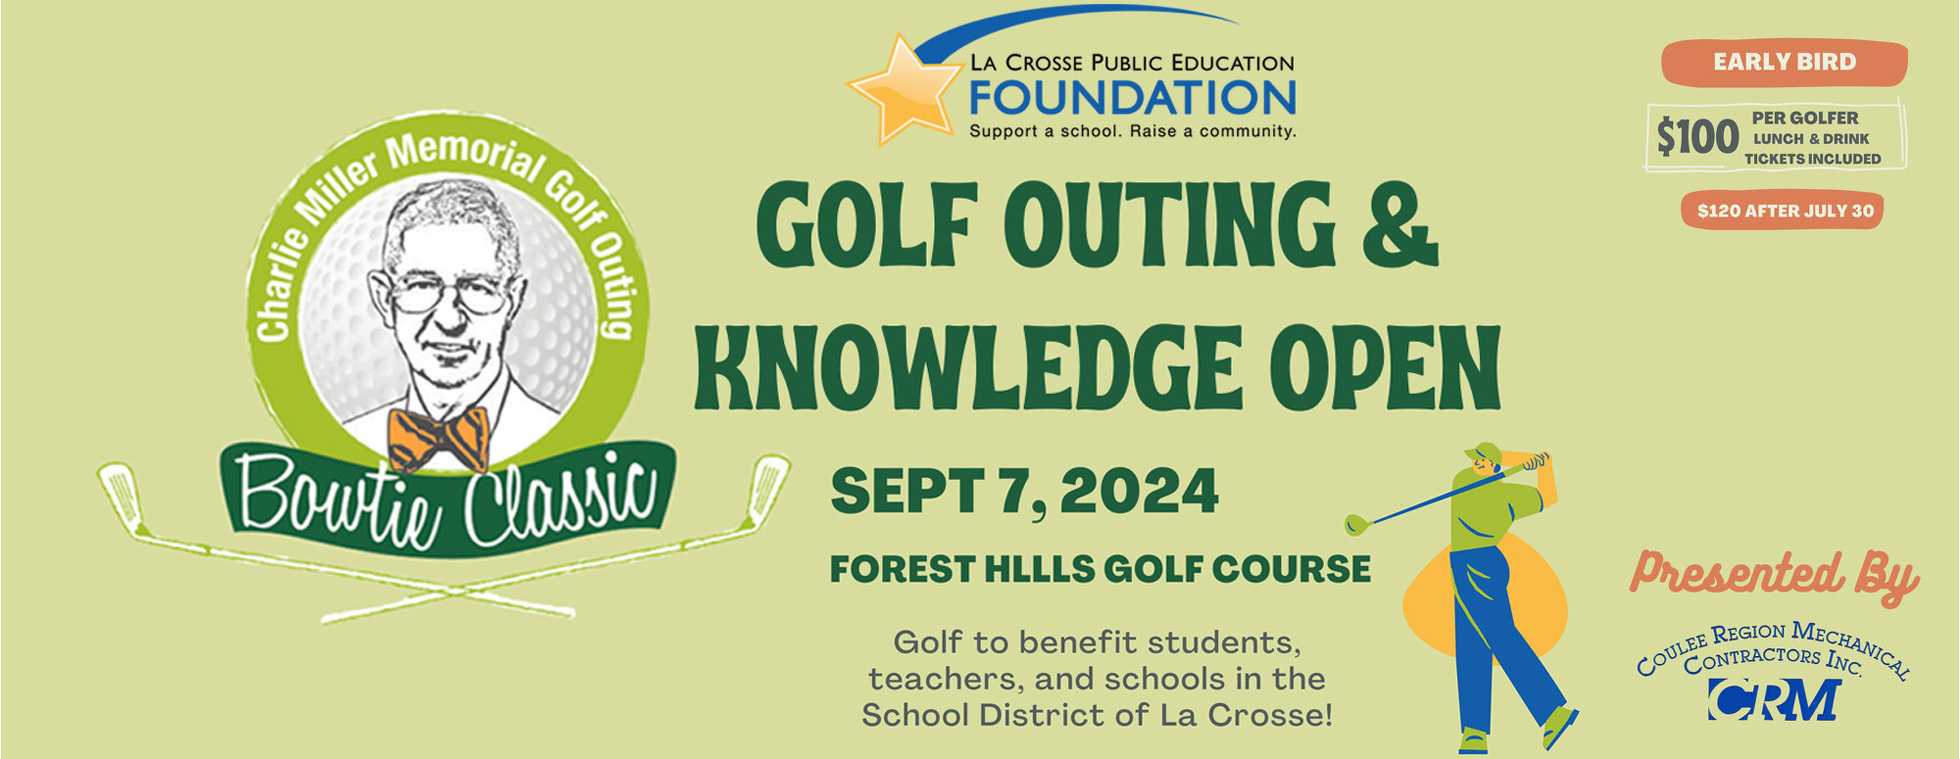 2024 Bowtie Classic Golf Outing & Knowledge Open